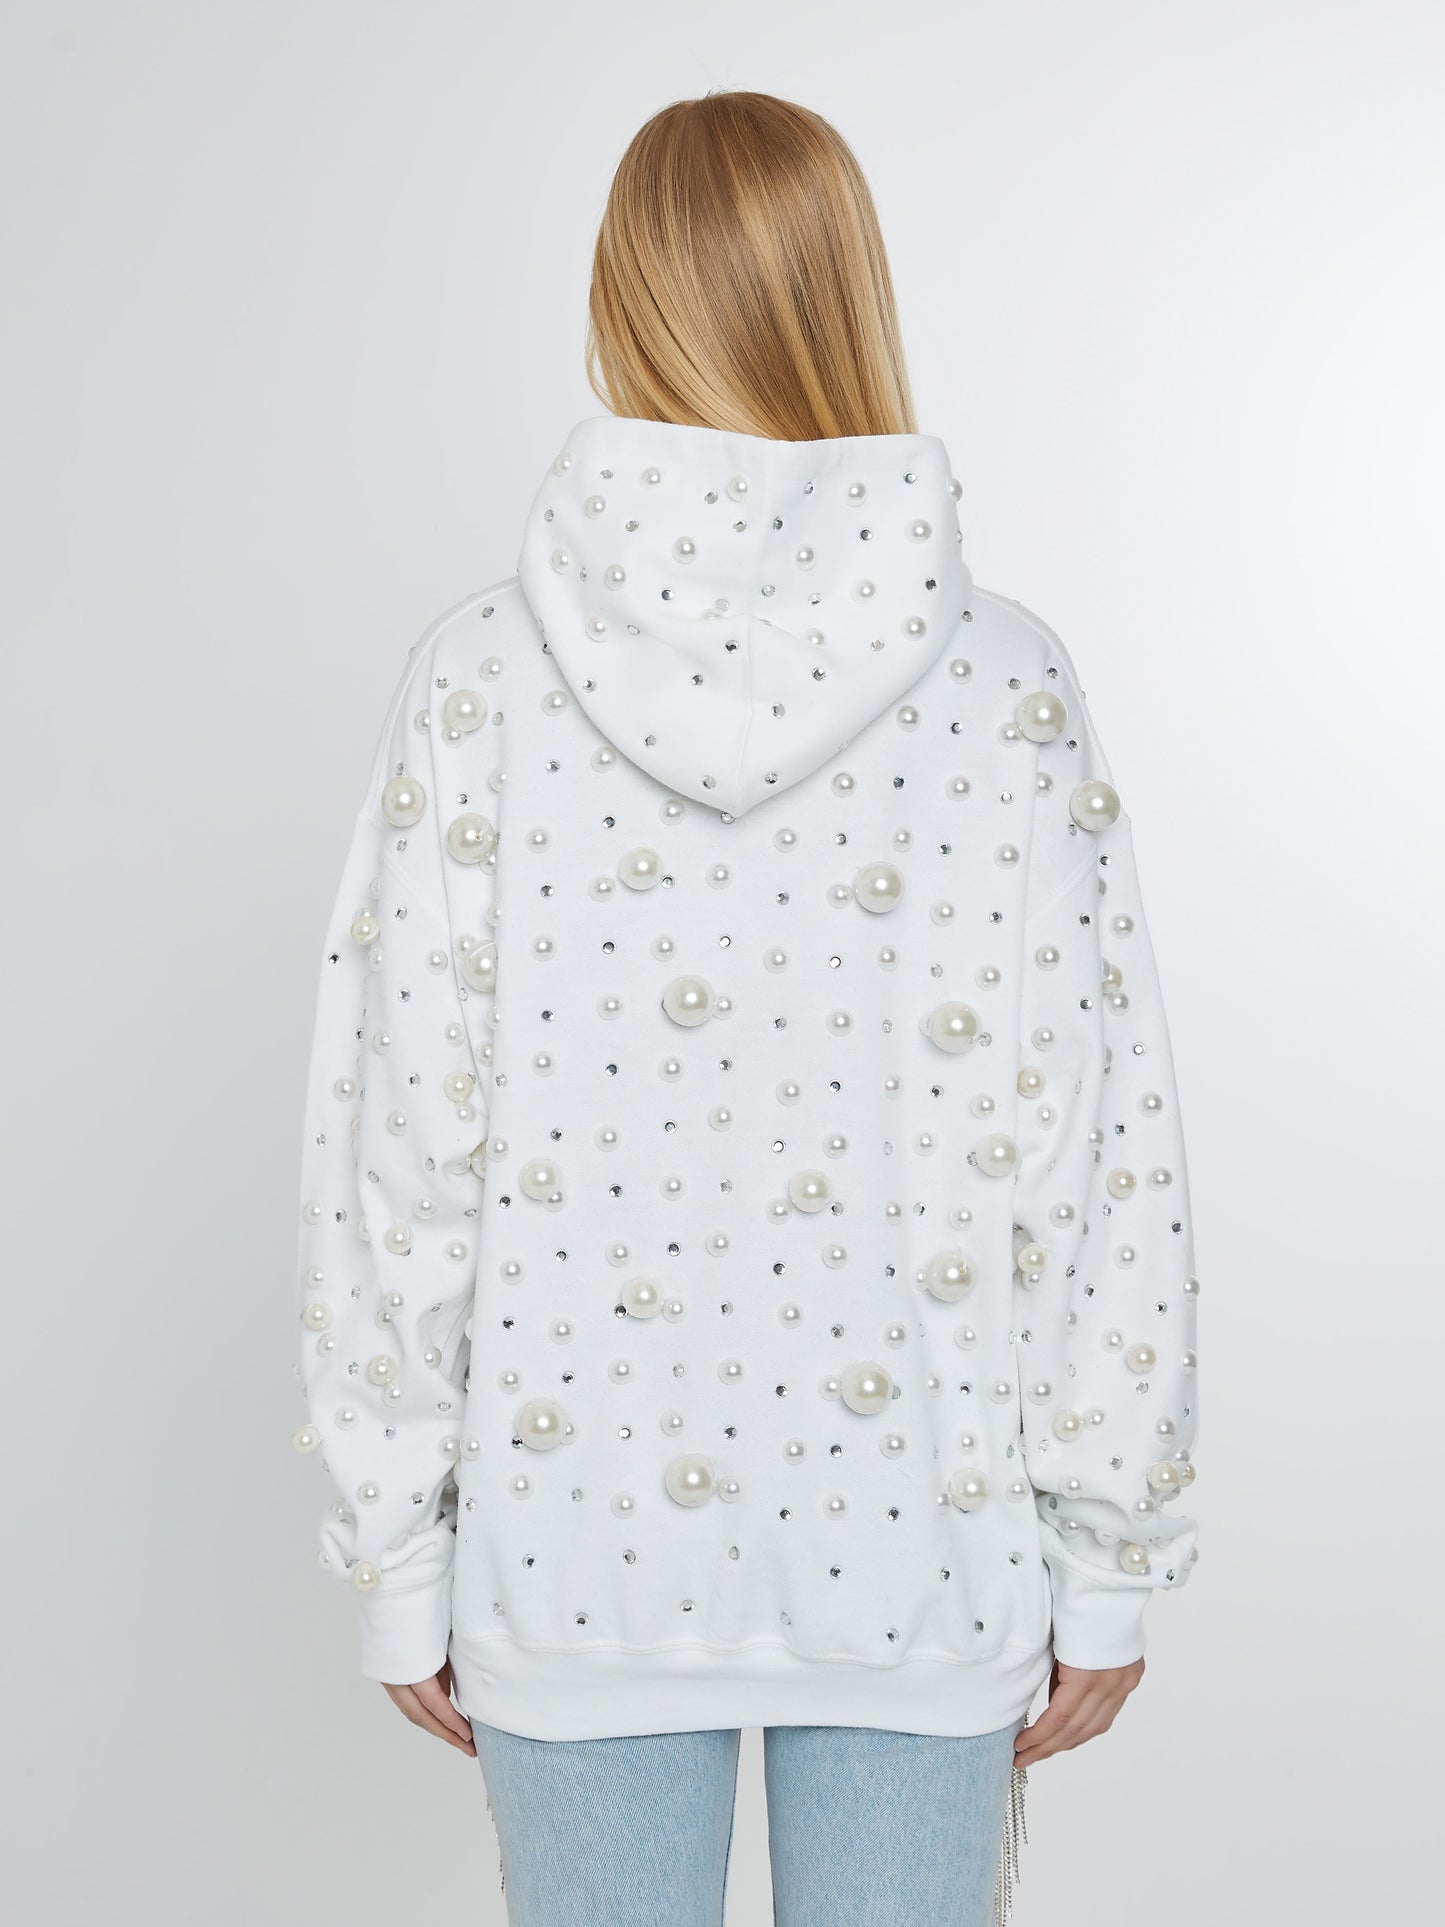 White hoodie with pearls